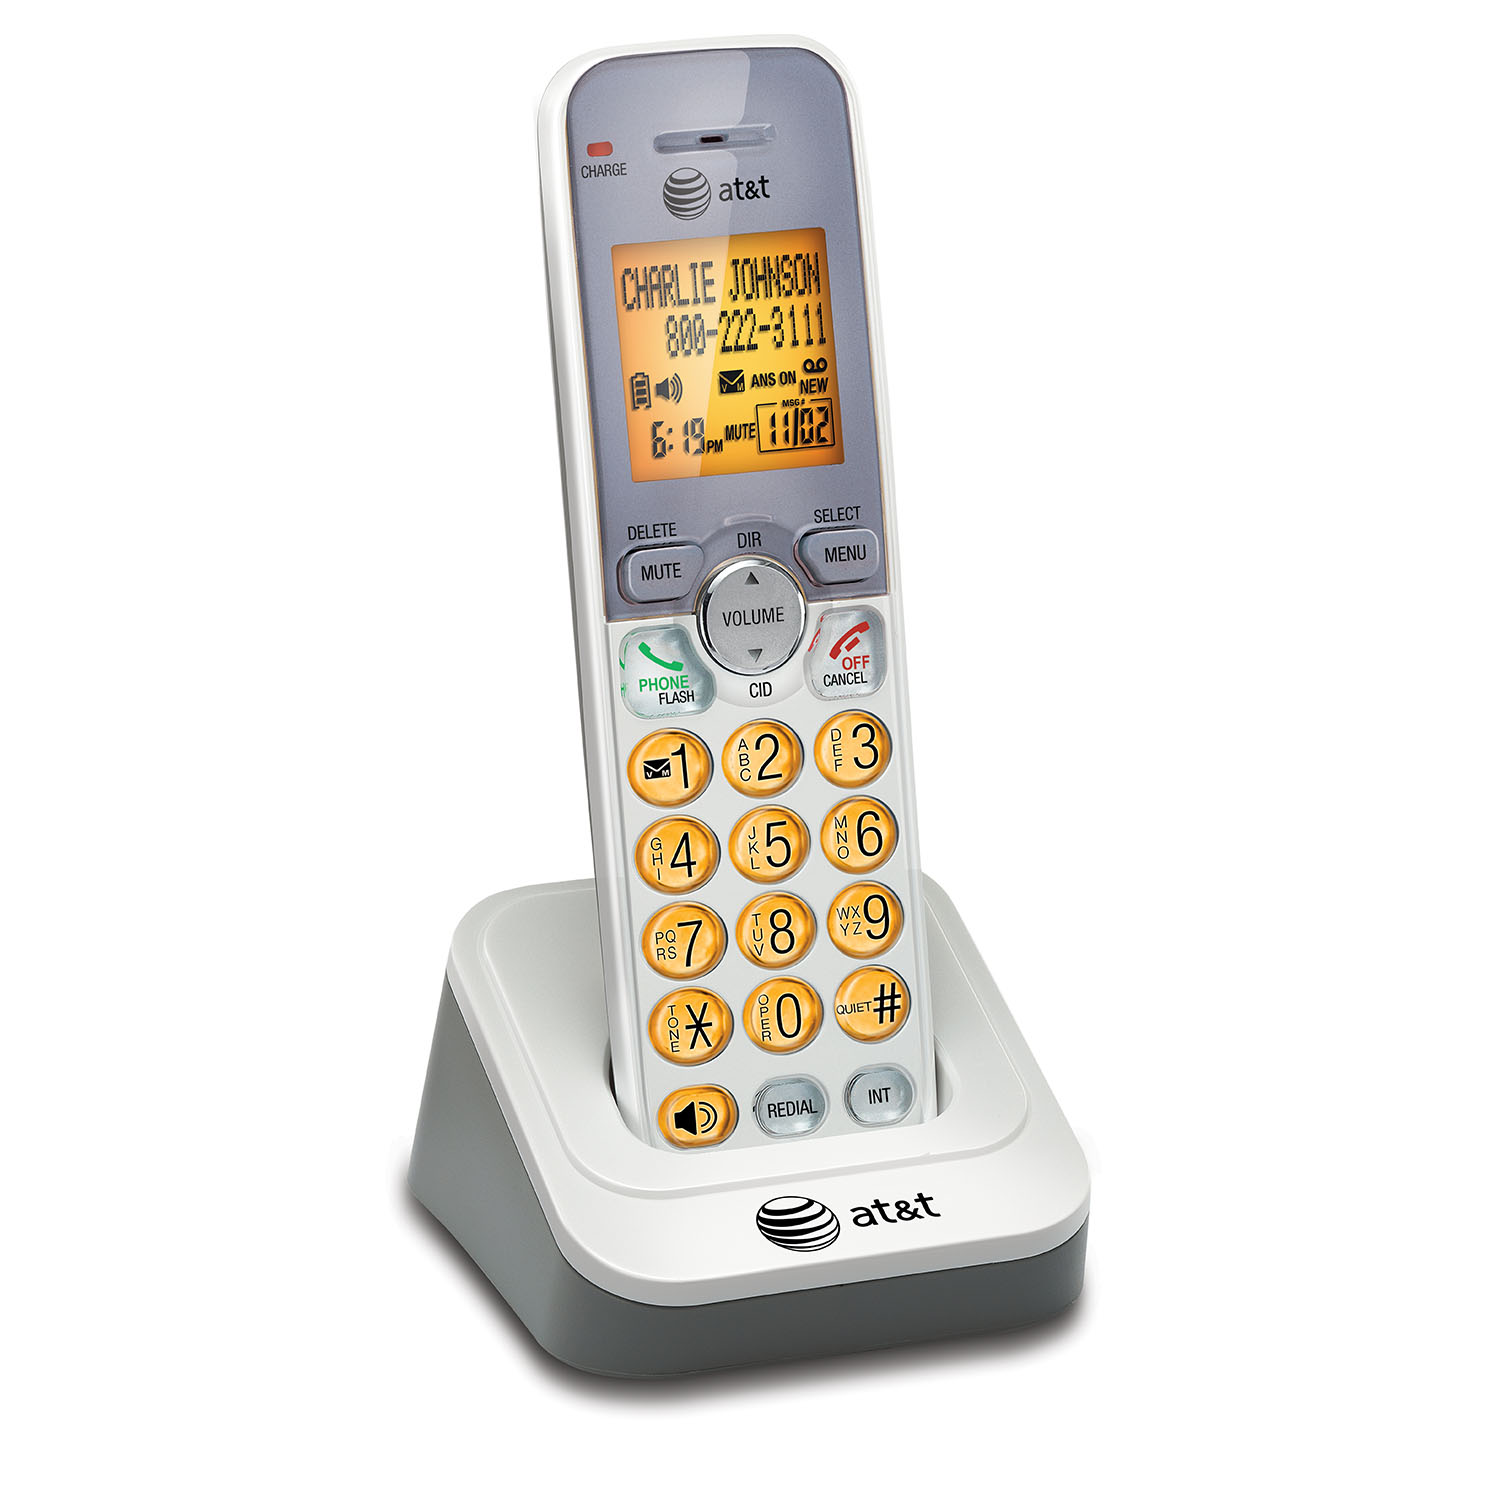 Accessory handset with caller ID/call waiting - view 2